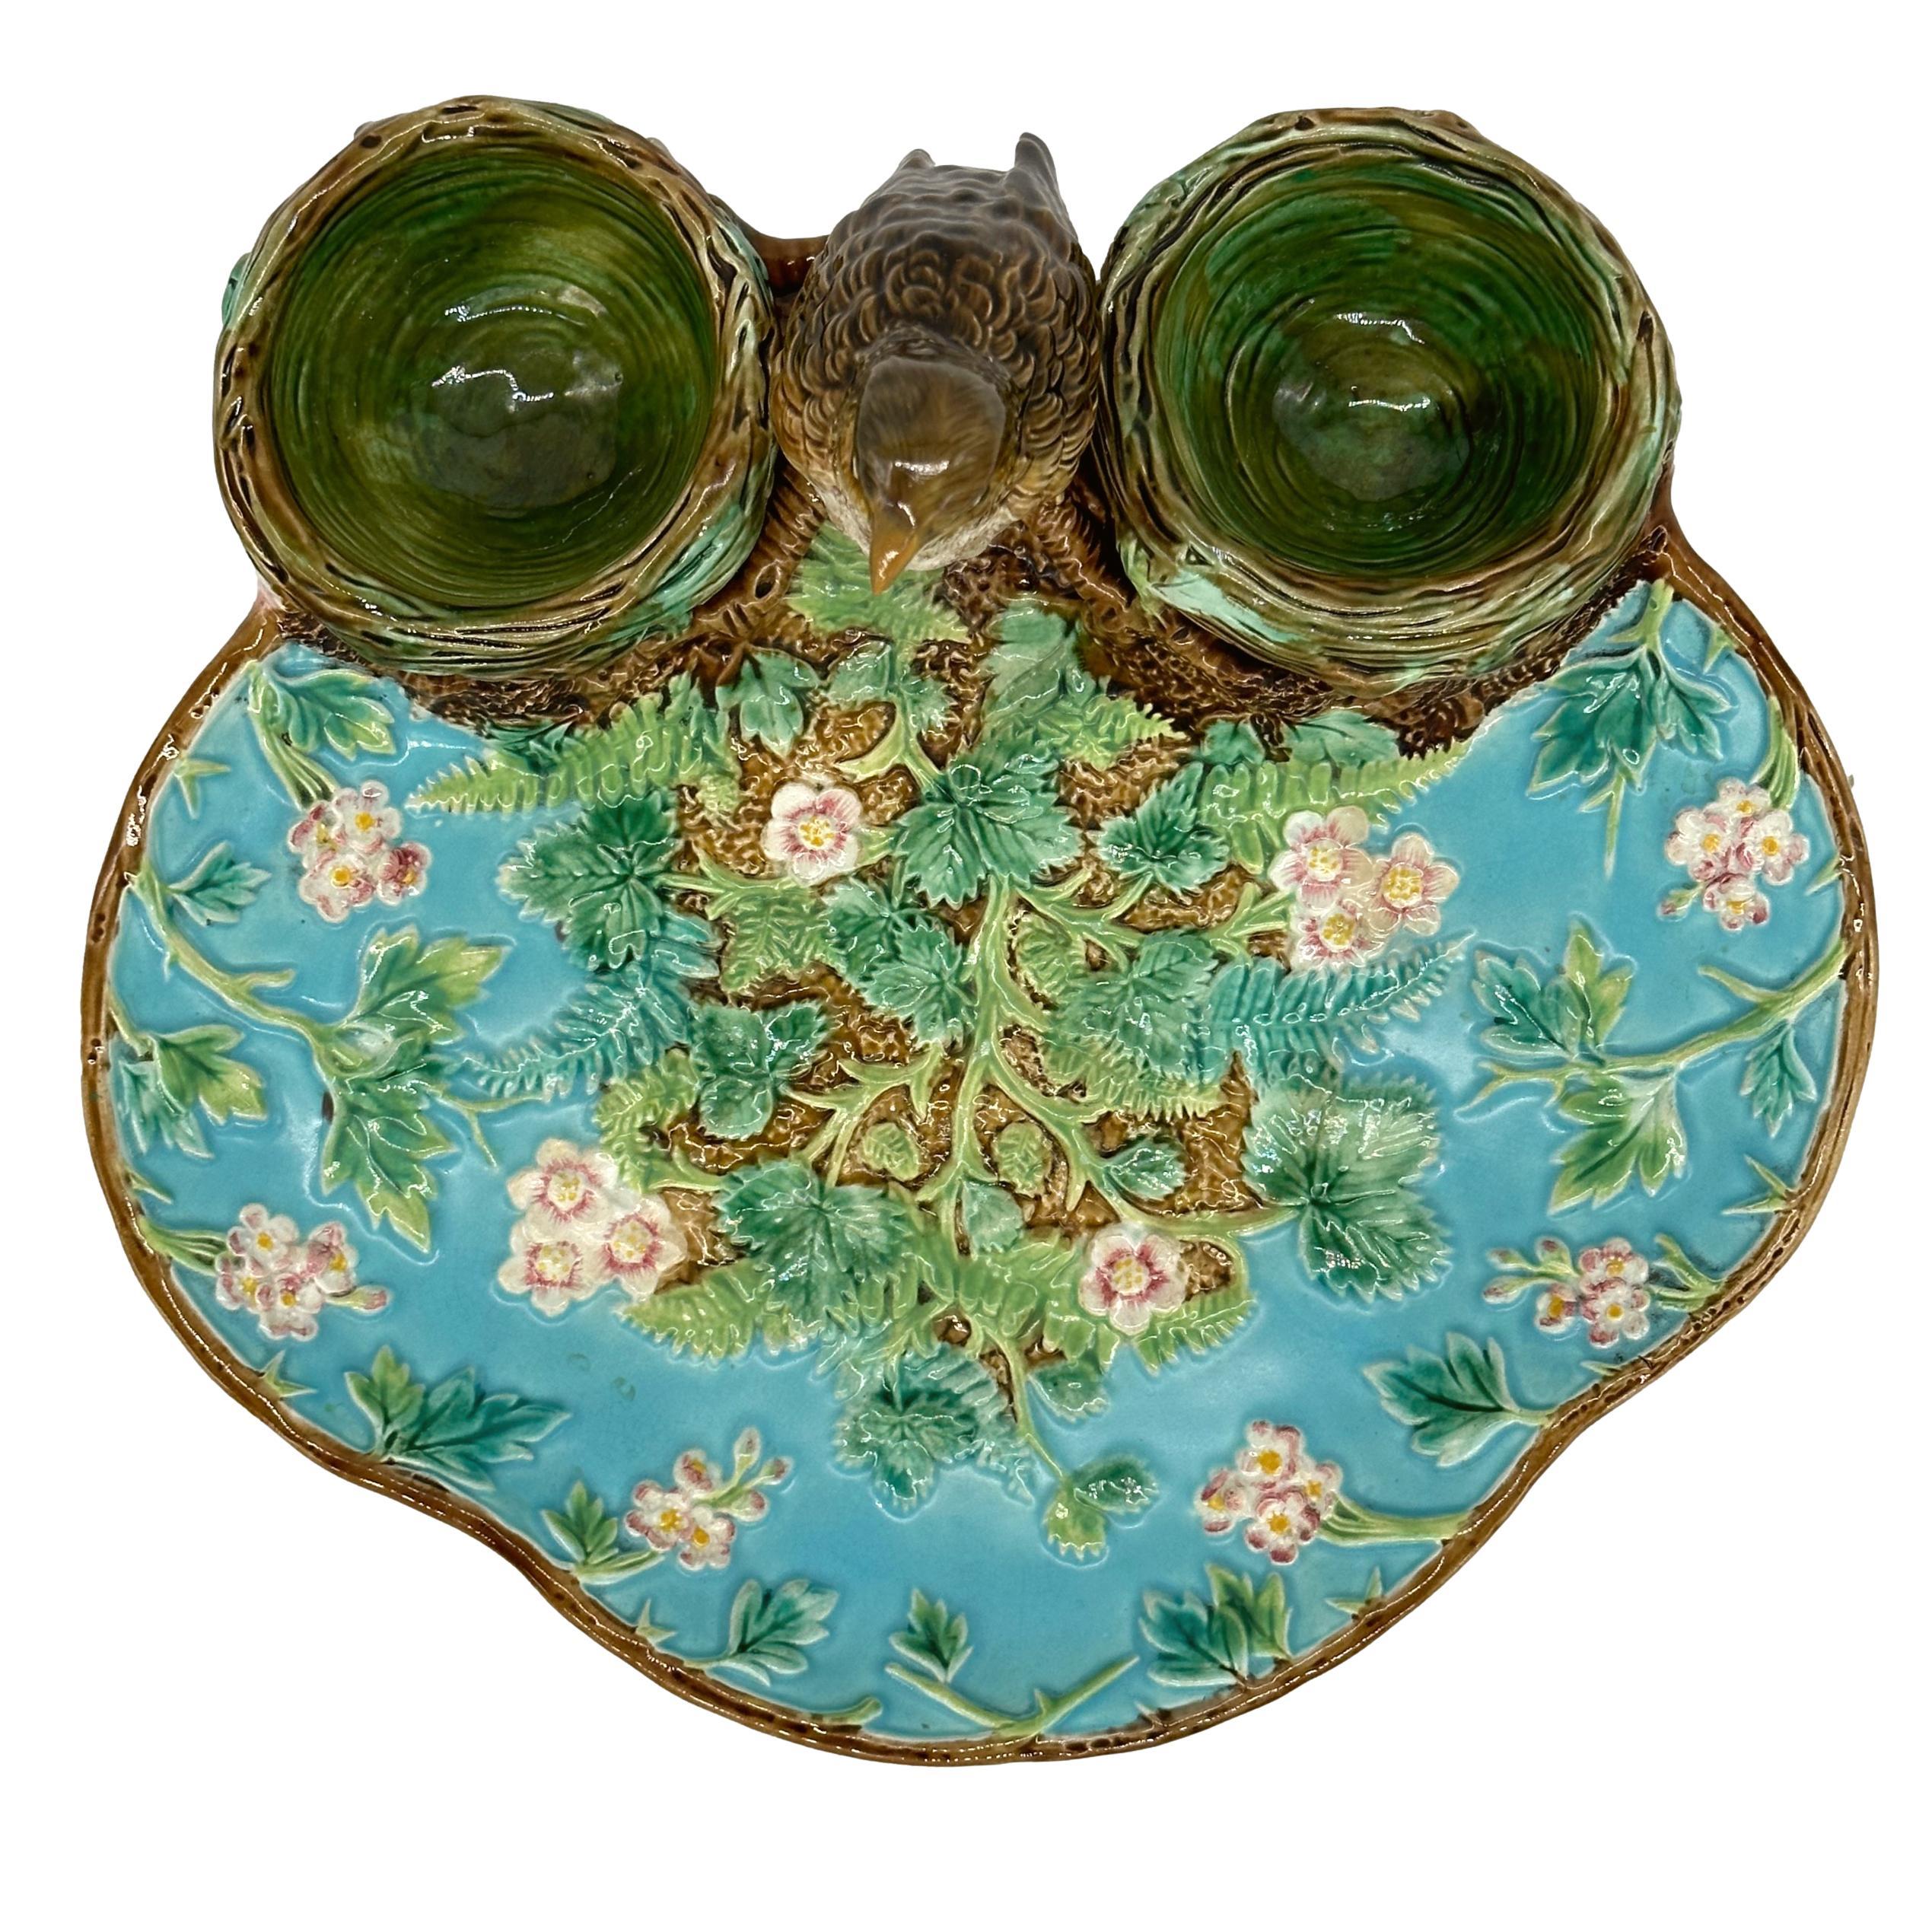 George Jones Majolica Strawberry Server Mounted by a Bird, English, circa 1870 For Sale 8